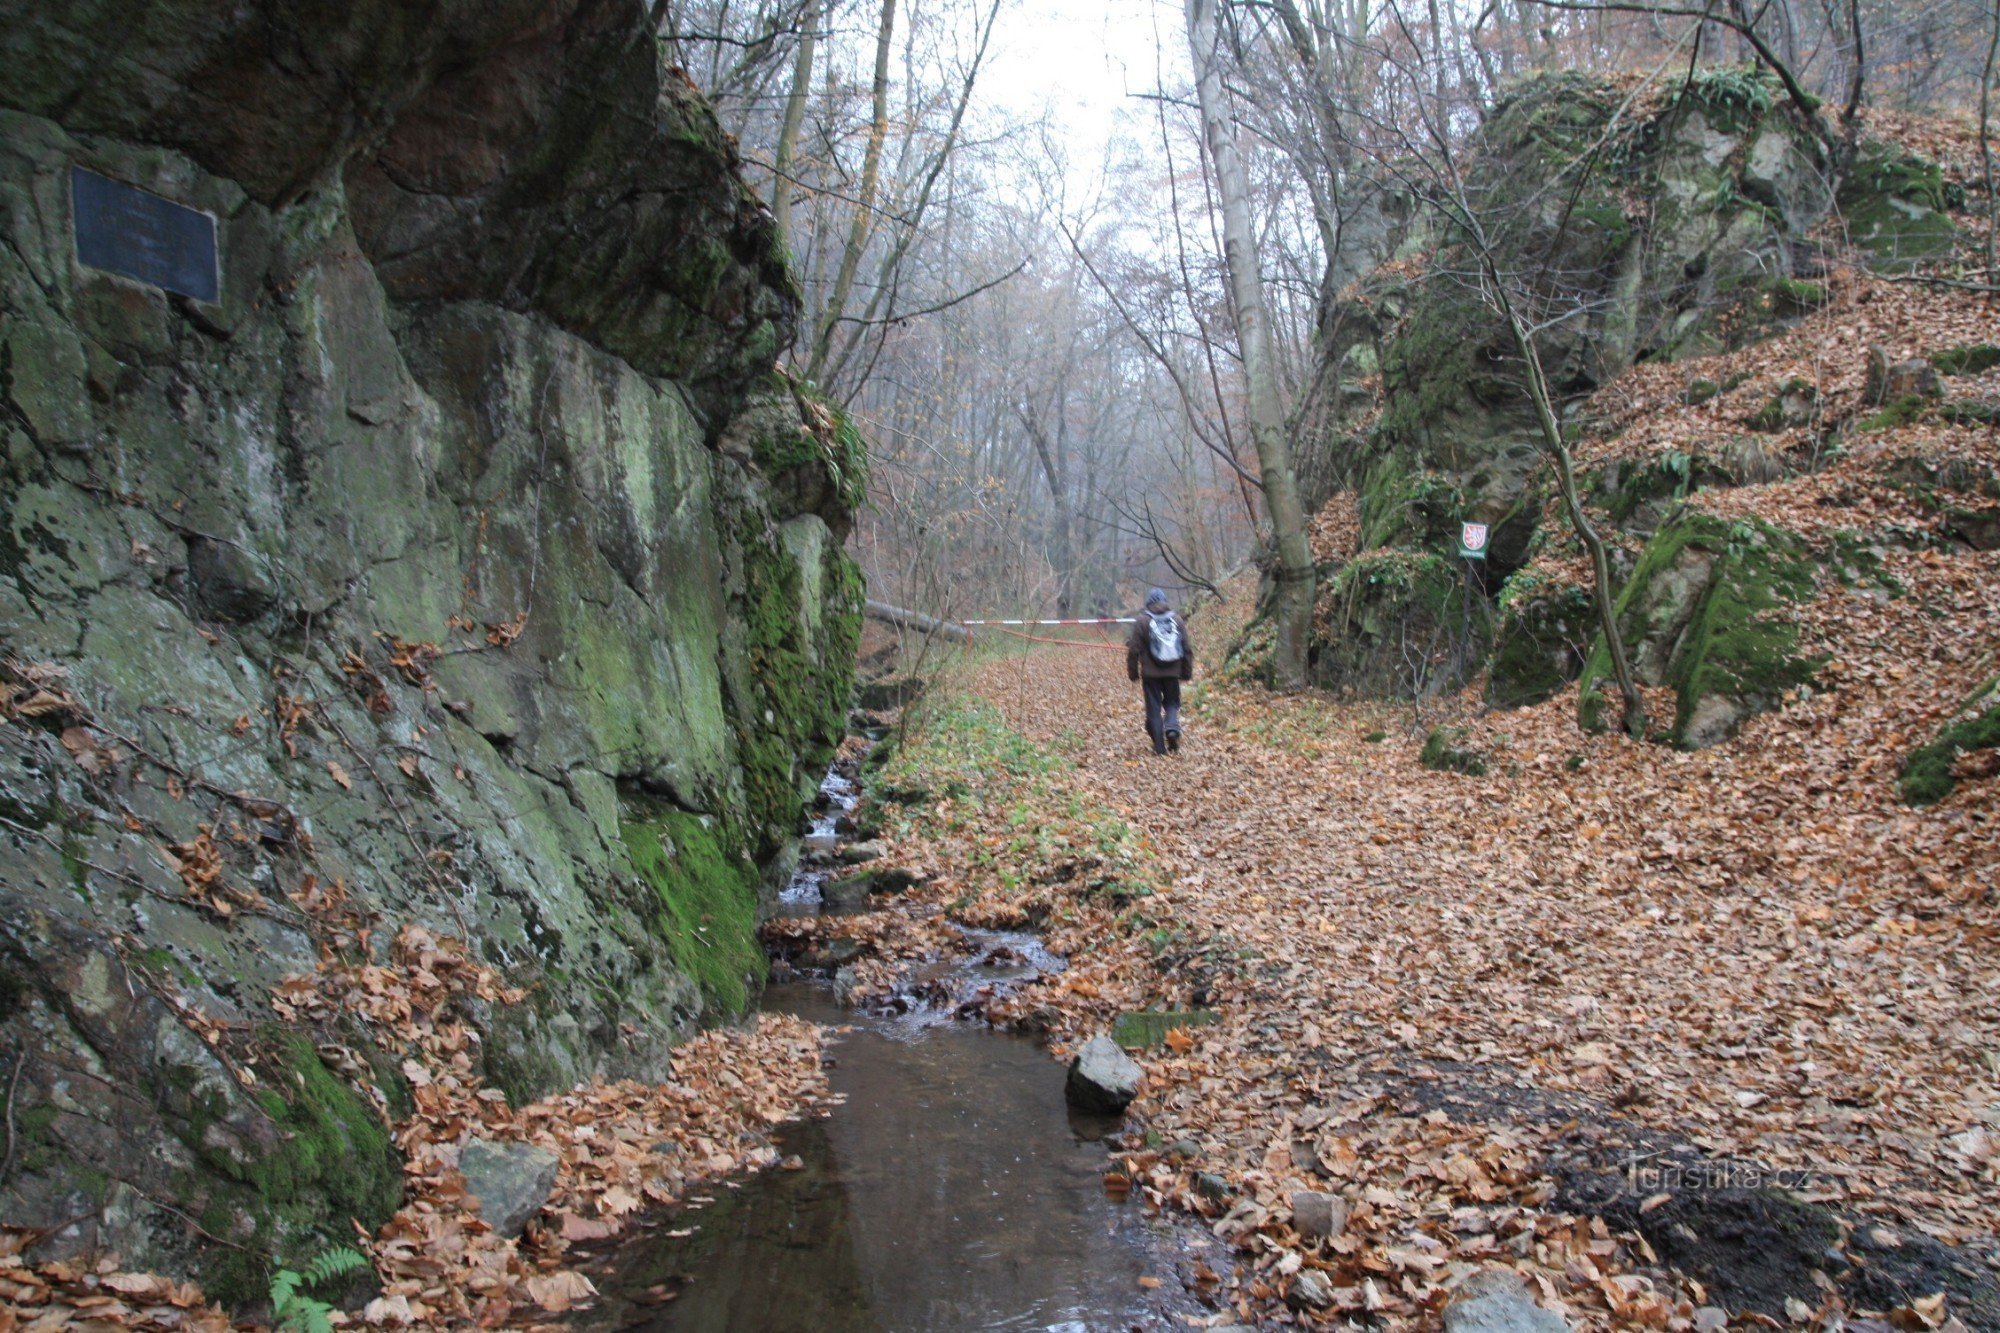 Mouse hole - rock gorge in late autumn